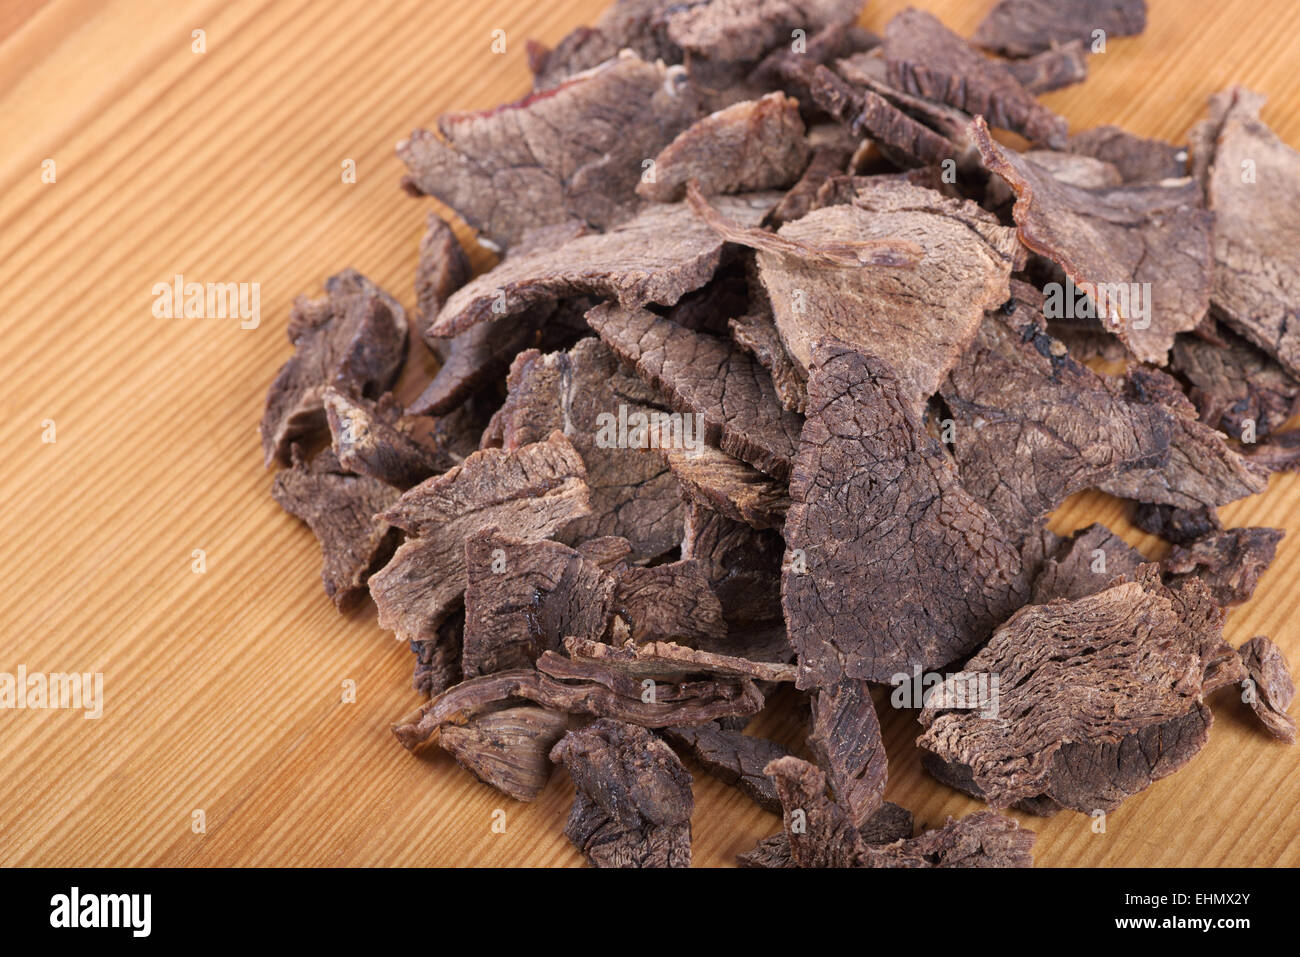 Dried meat cut into thin slices closeup Stock Photo